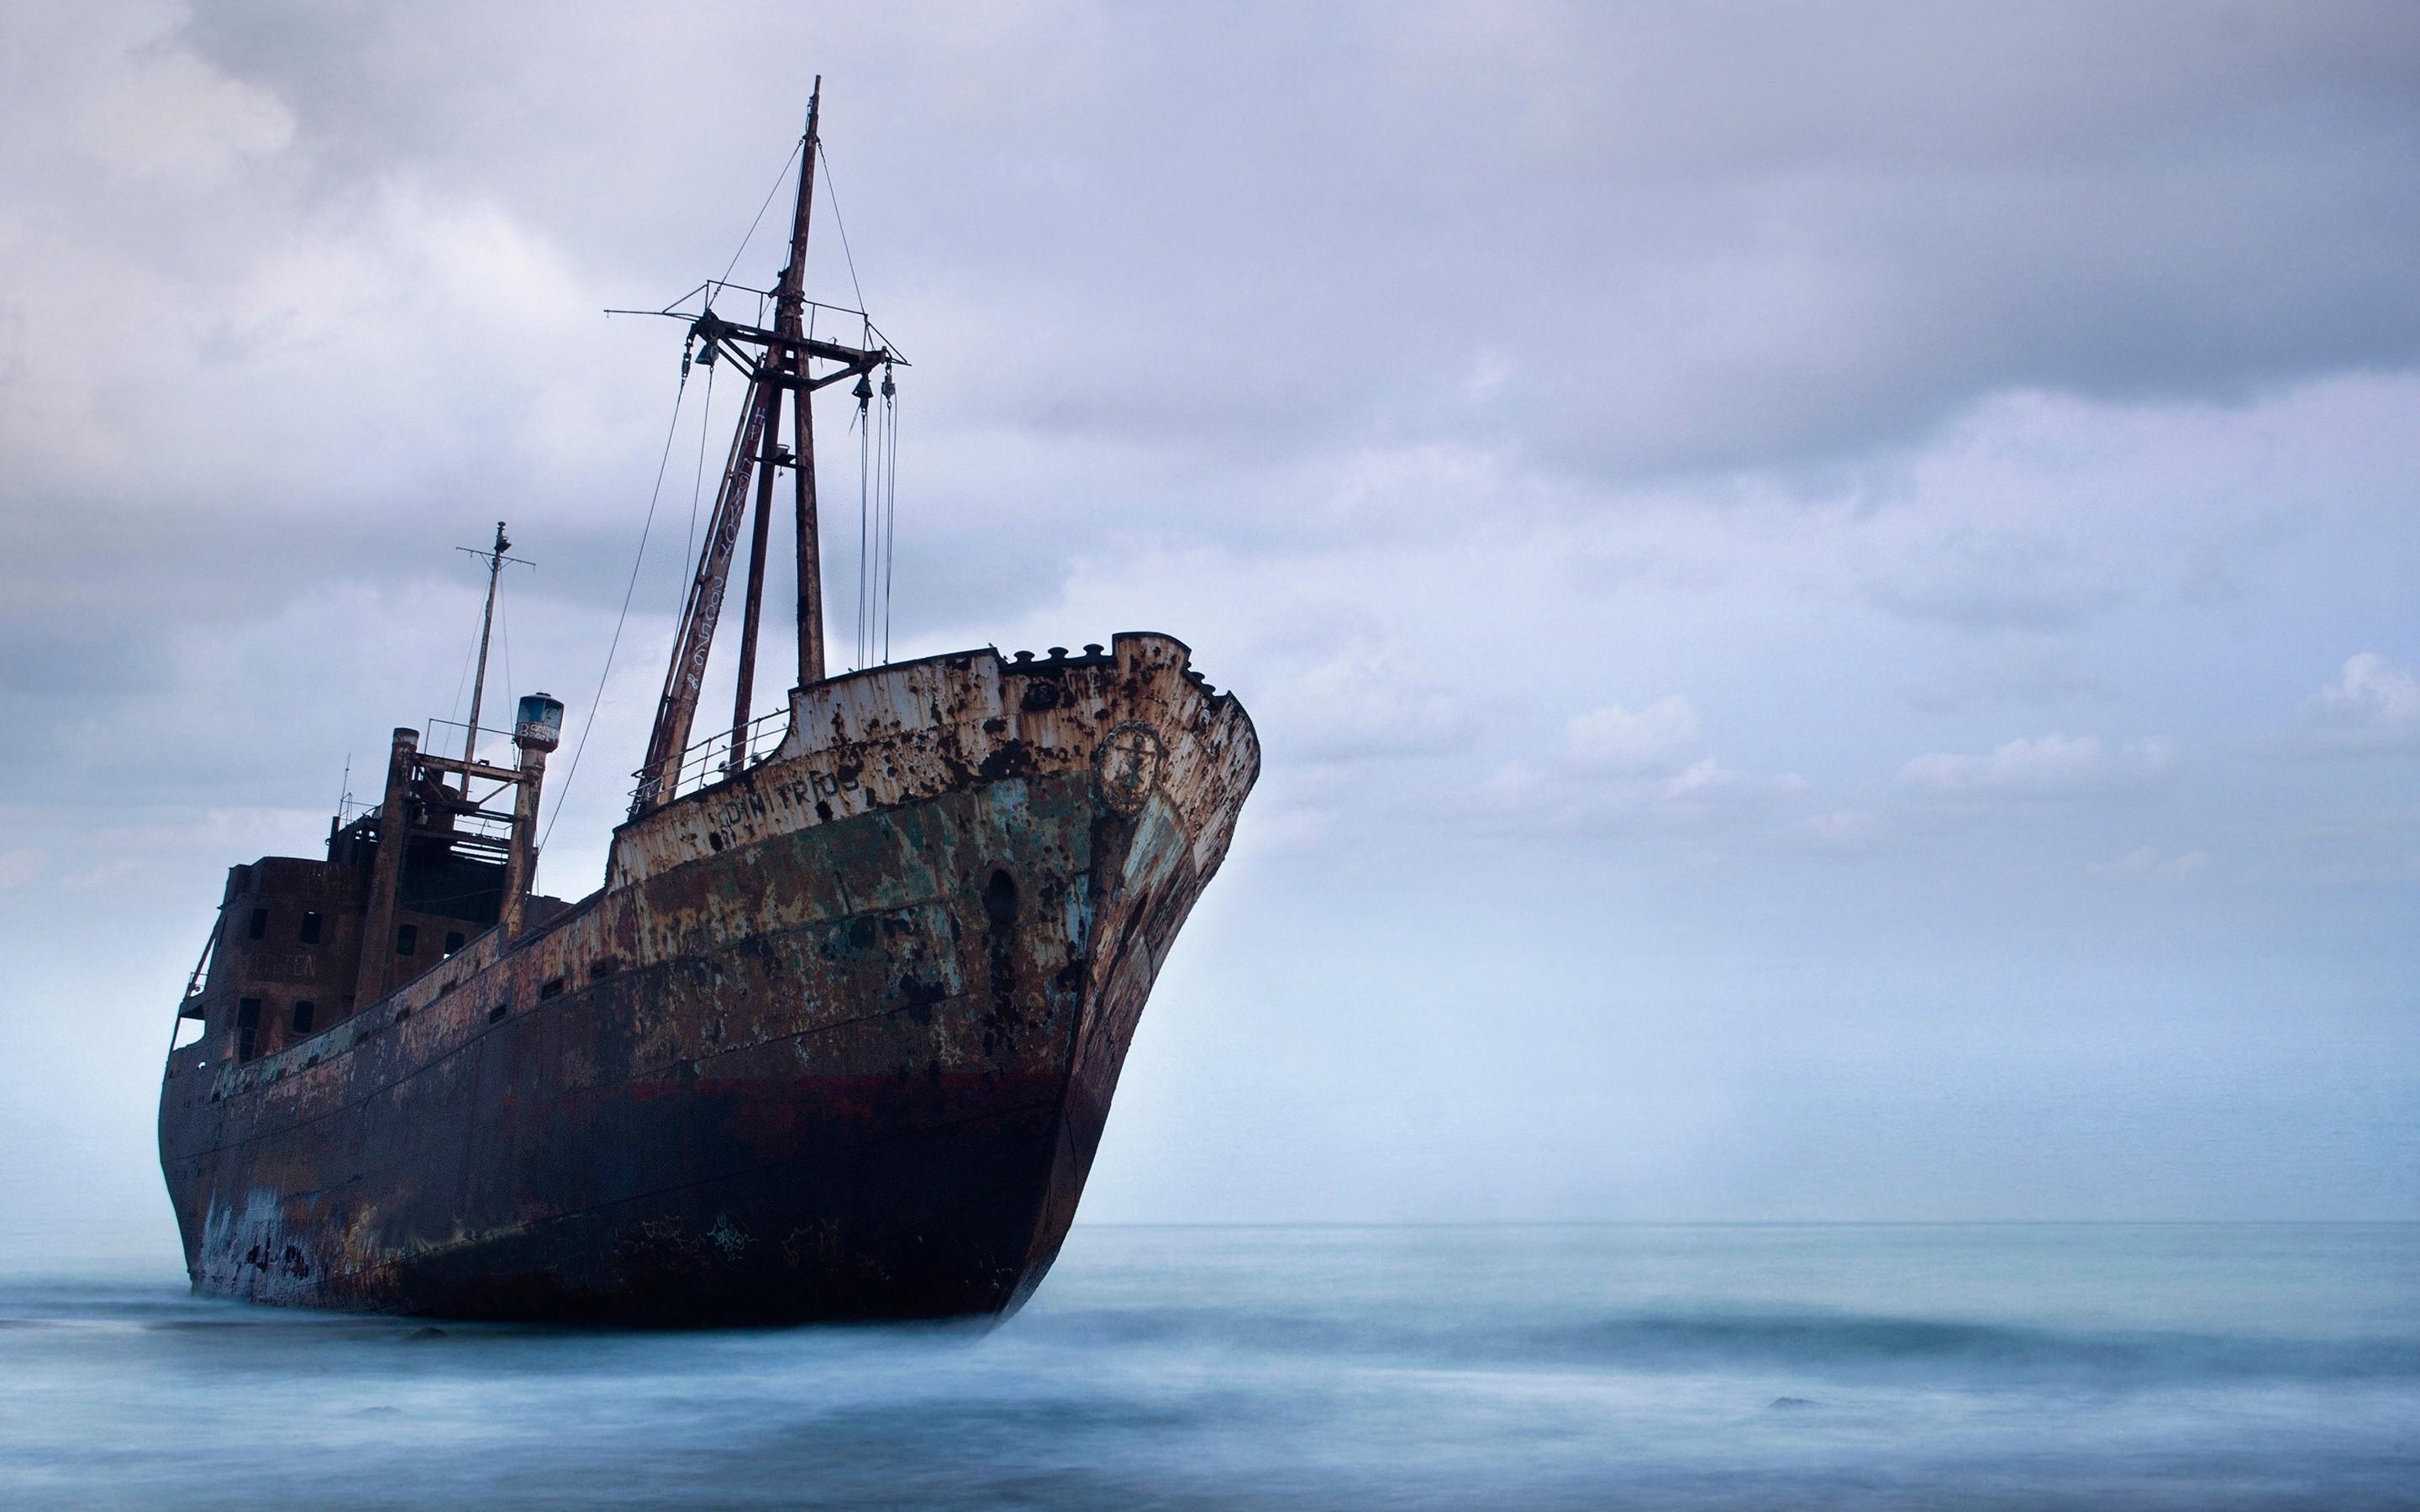 #ship, #old ship, #shipwreck, #photography, #clouds, #sky